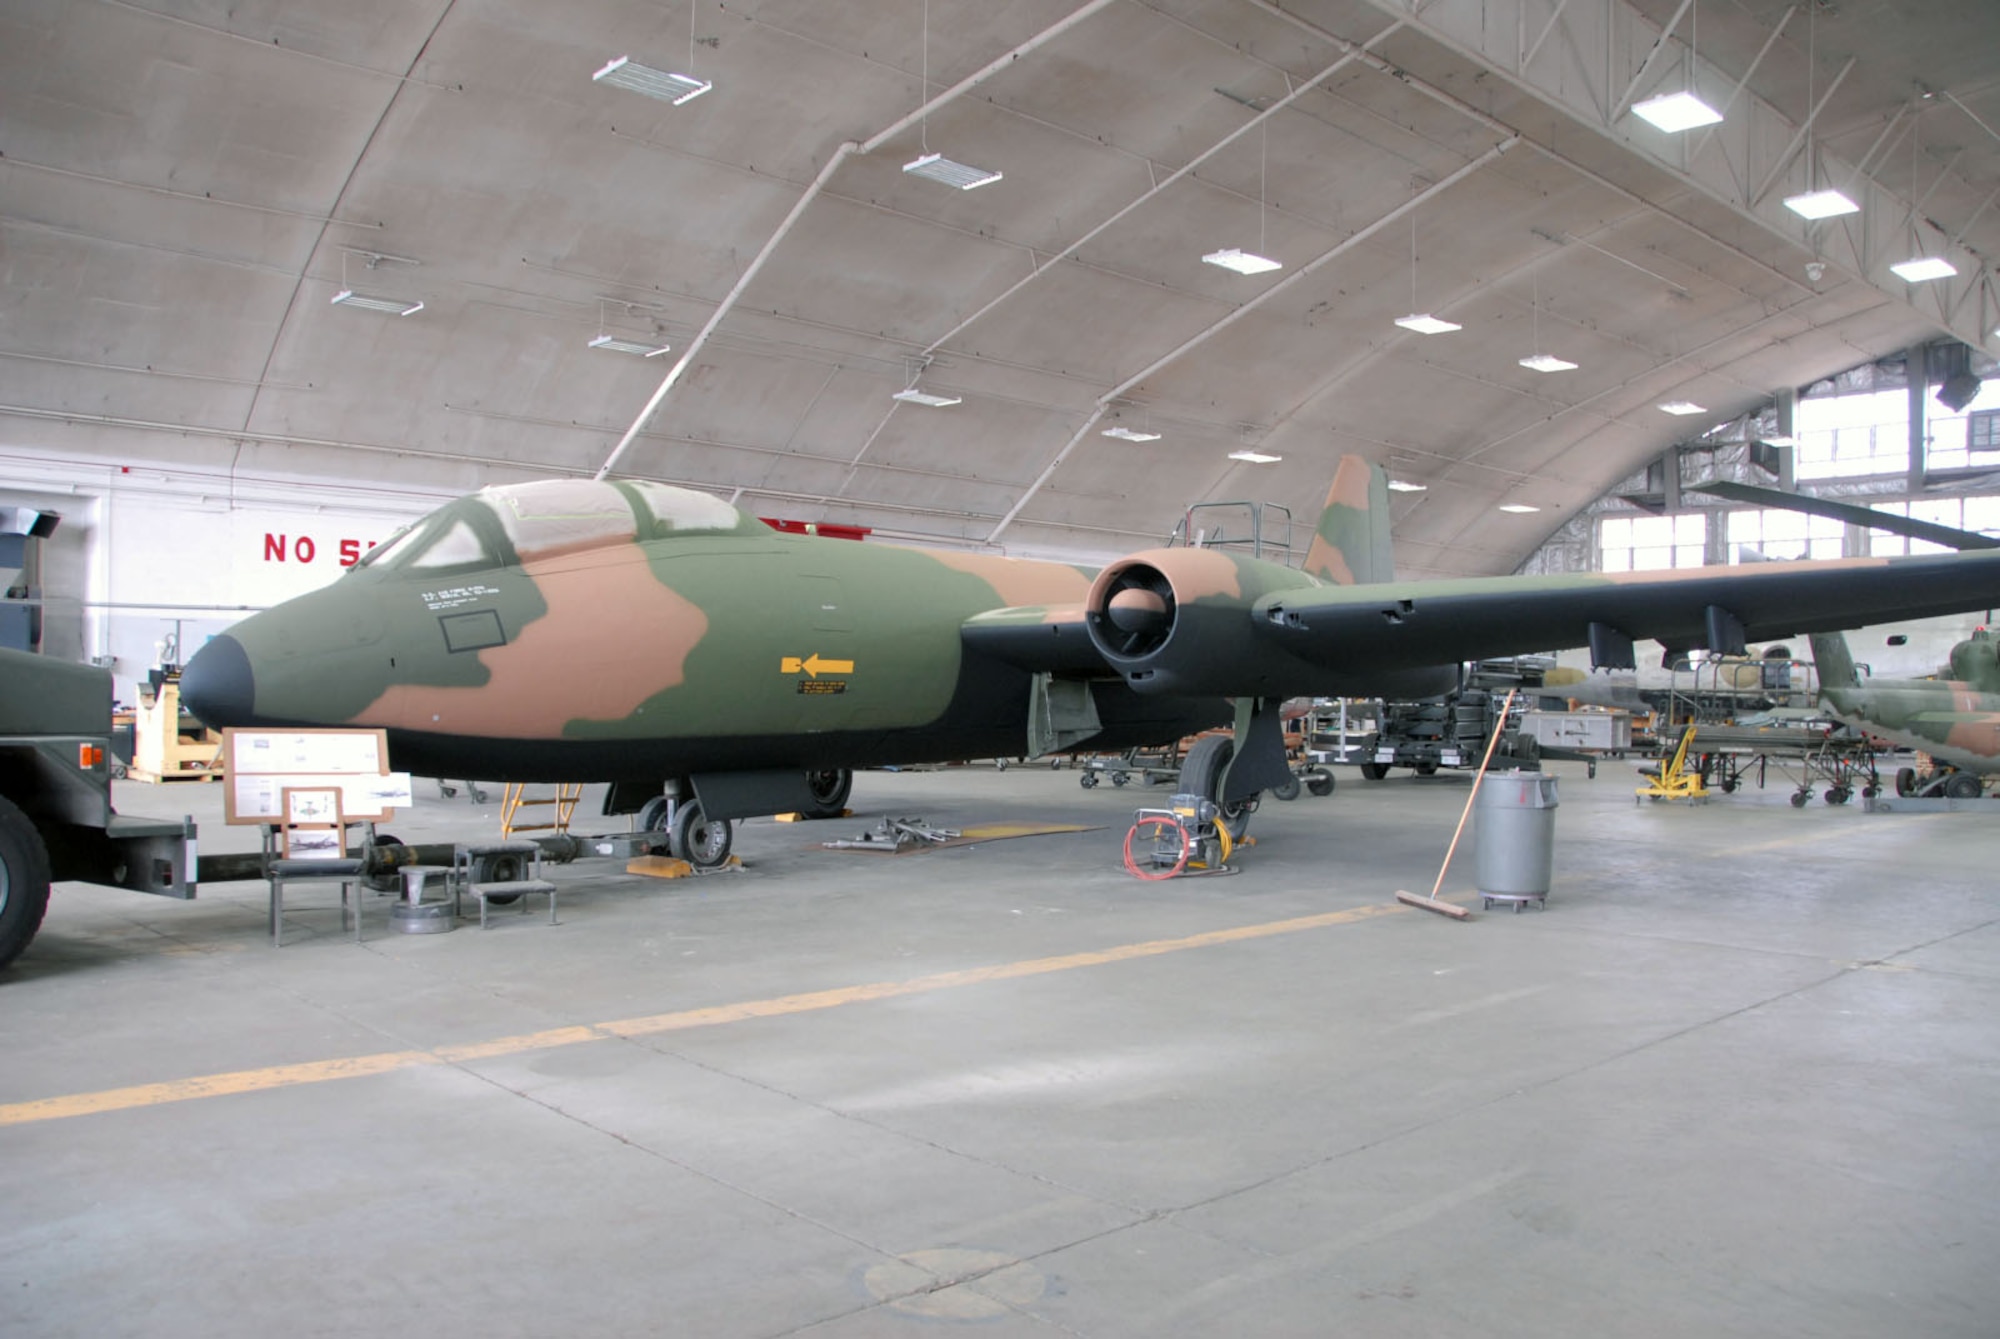 DAYTON, Ohio (11/2010) -- Martin B-57 in restoration at the National Museum of the U.S. Air Force. (U.S. Air Force photo)